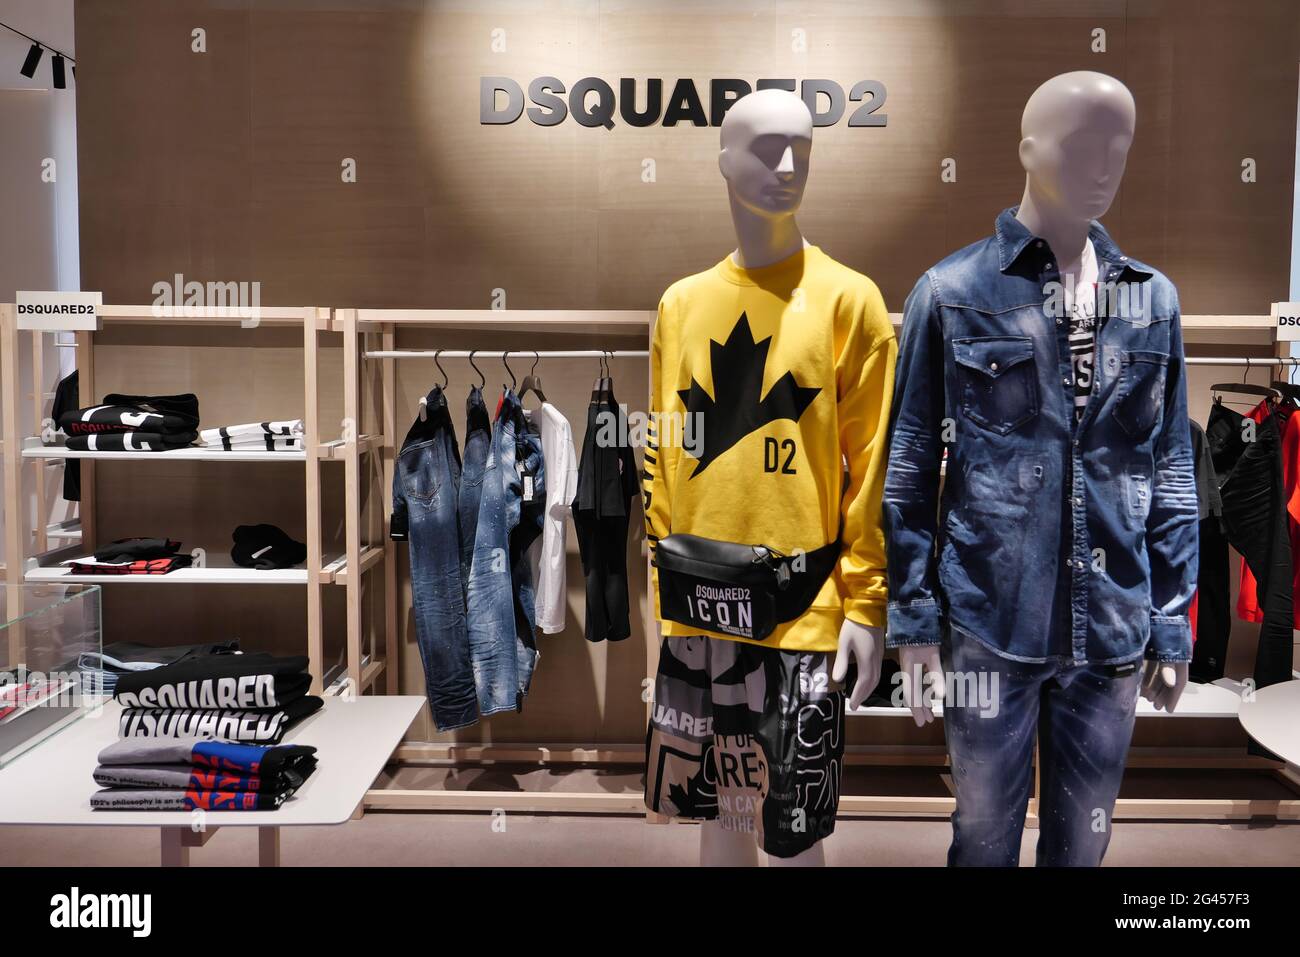 Dsquared2 High Resolution Stock Photography and Images - Alamy